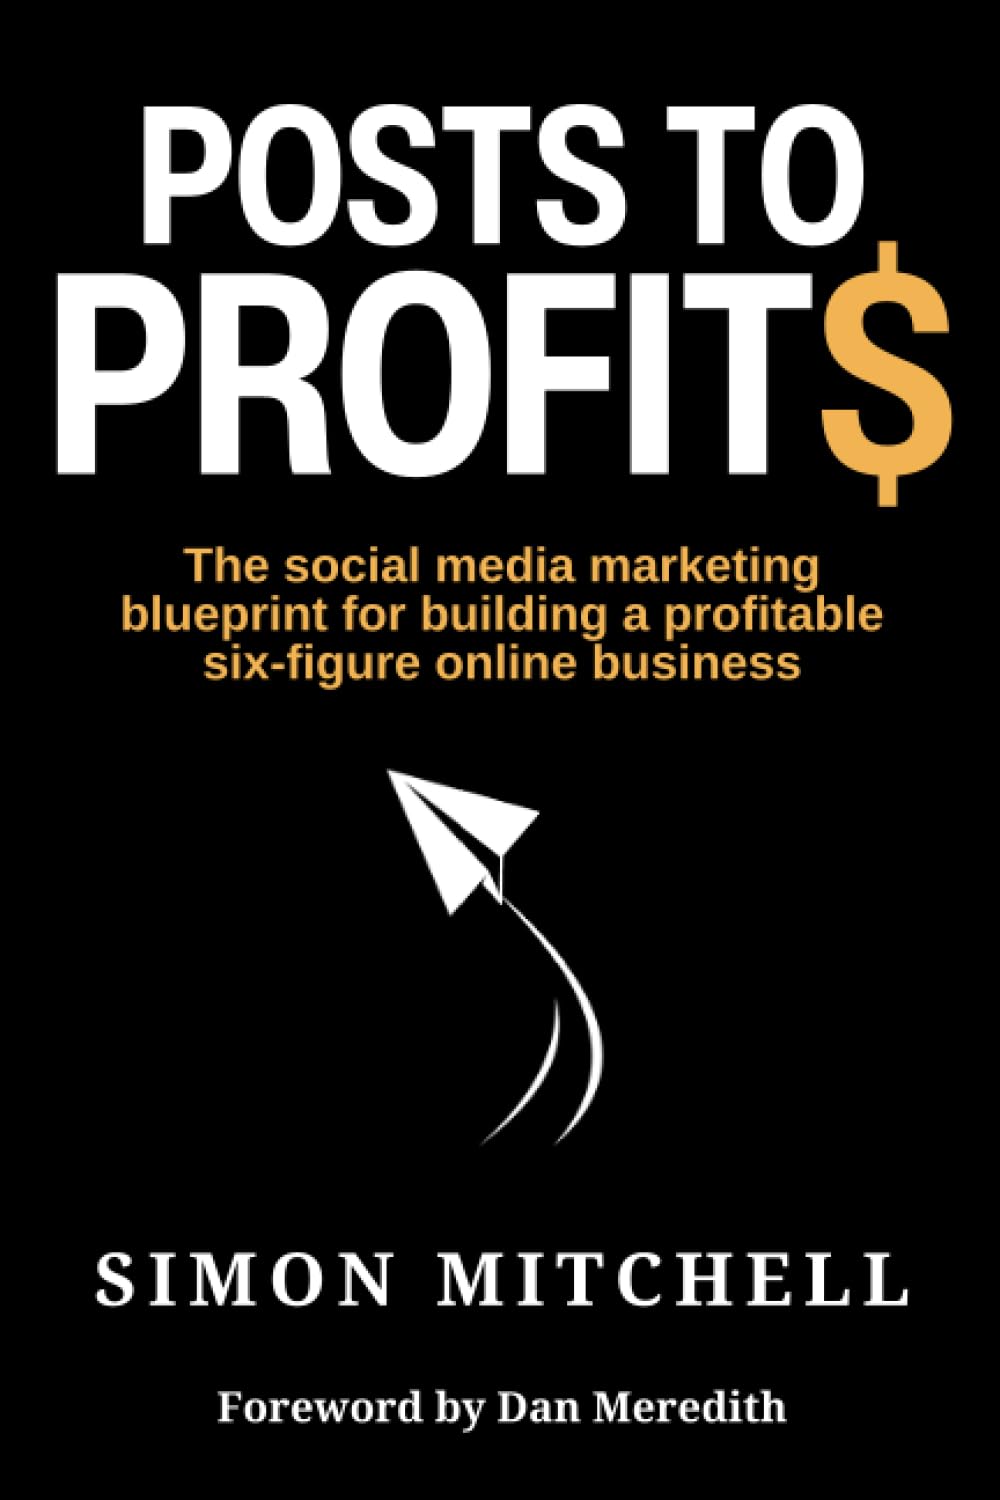 Posts to Profits Review